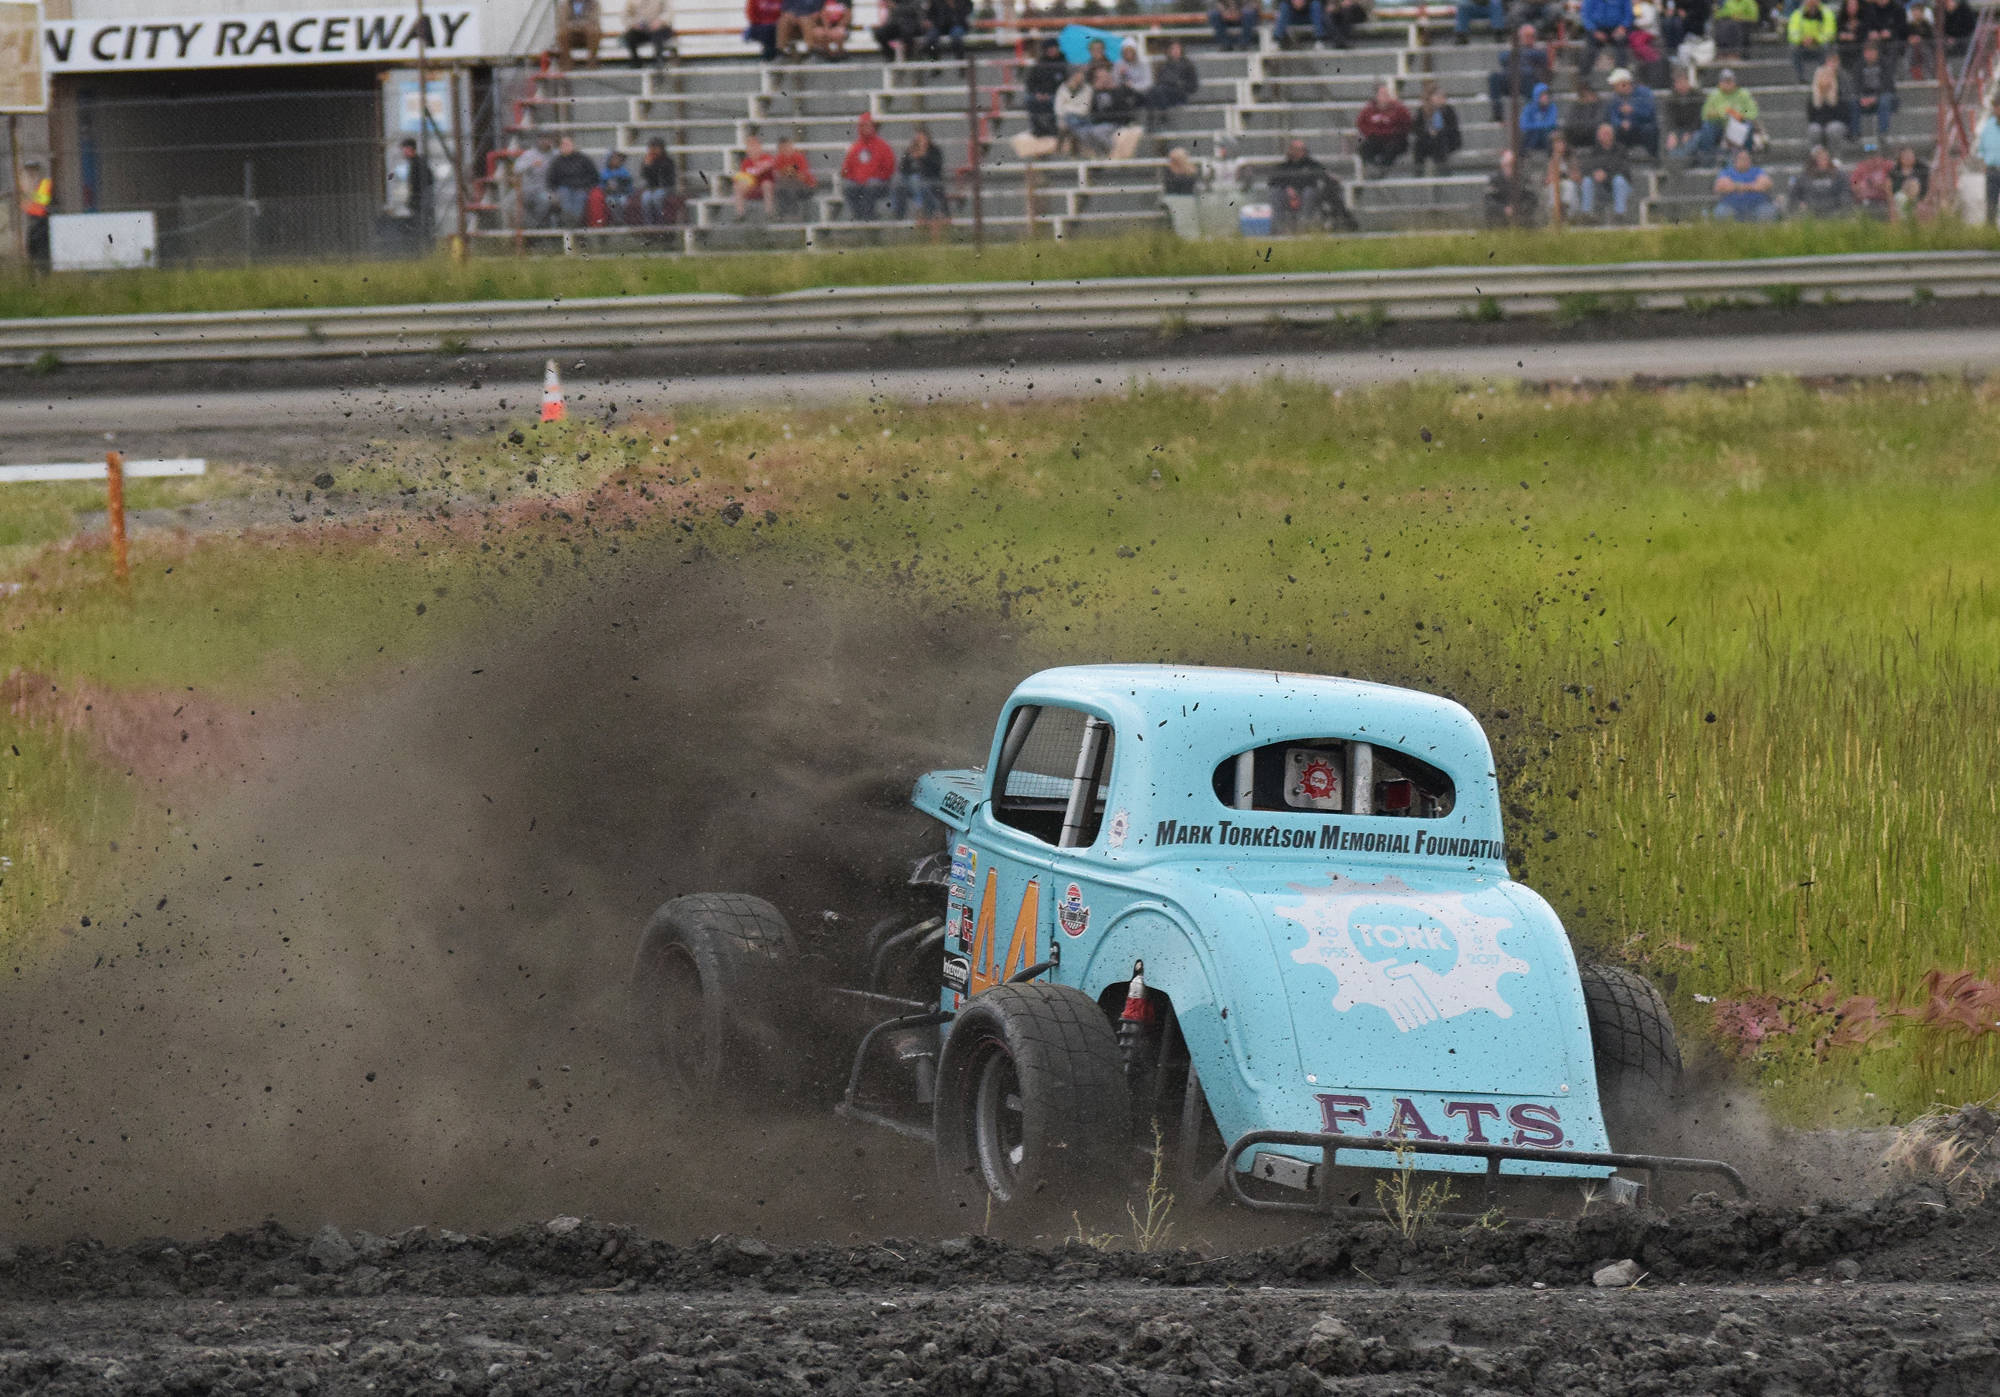 Ty Torkelson spins through the dirt Saturday night in a Legends heat race at Twin City Raceway in Kenai. (Photo by Joey Klecka/Peninsula Clarion)